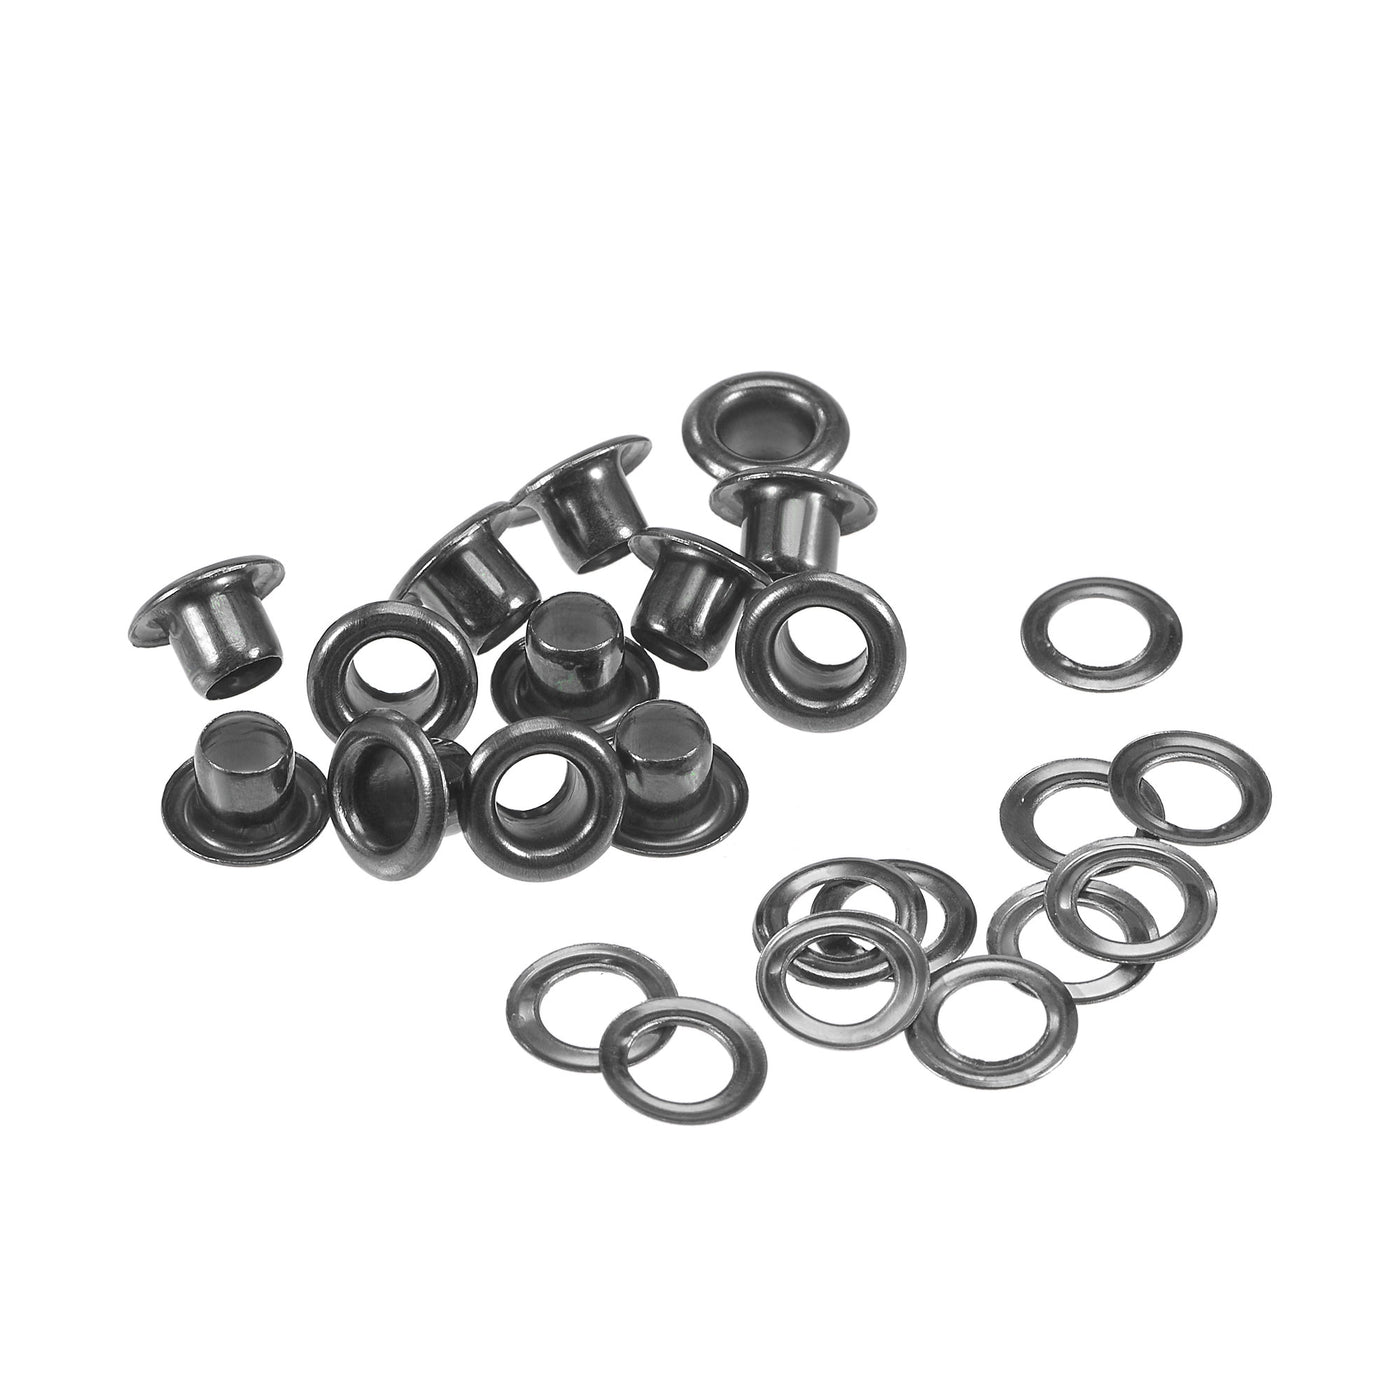 uxcell Uxcell Eyelet with Washer 7x3.5x4mm Copper Grommet Chrome Plated Black 100 Set